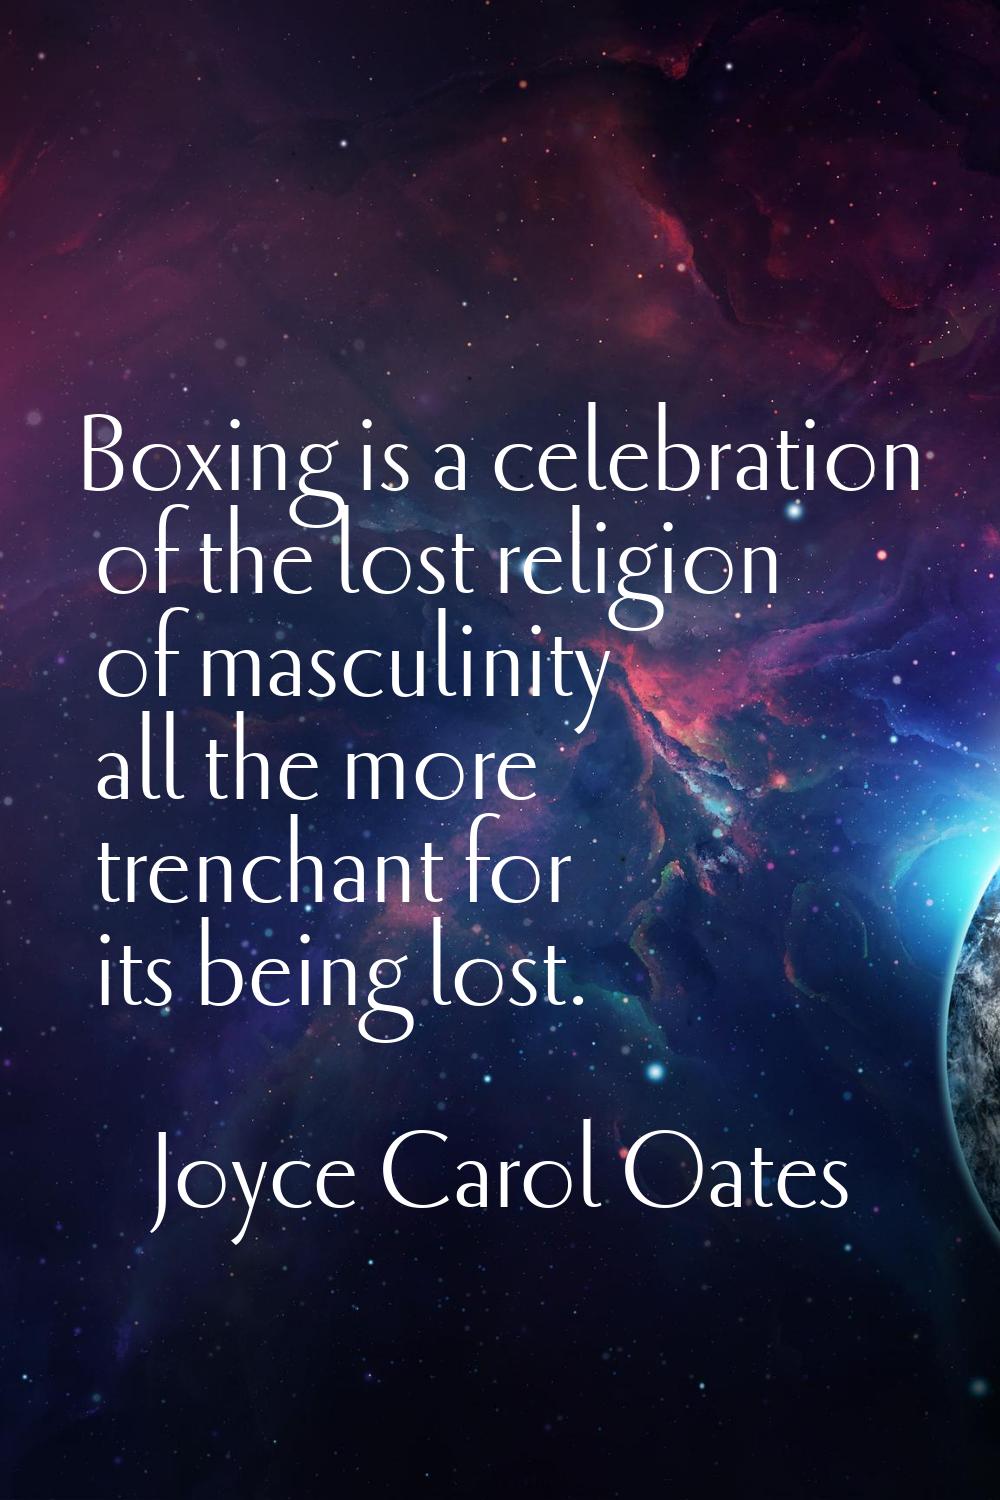 Boxing is a celebration of the lost religion of masculinity all the more trenchant for its being lo